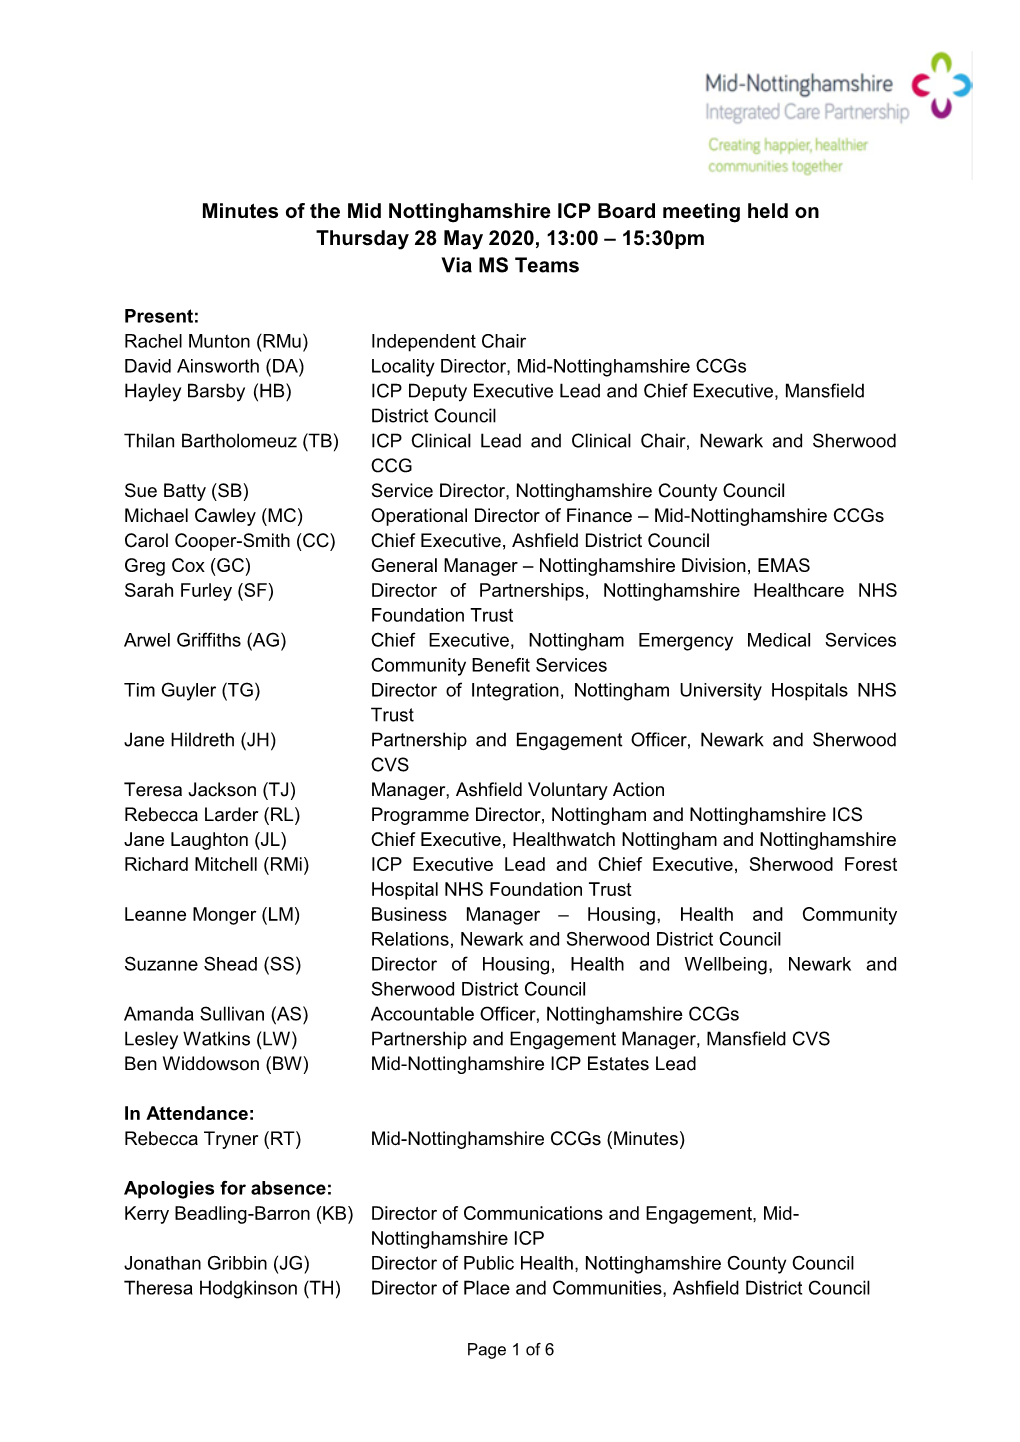 Minutes of the Mid Nottinghamshire ICP Board Meeting Held on Thursday 28 May 2020, 13:00 – 15:30Pm Via MS Teams